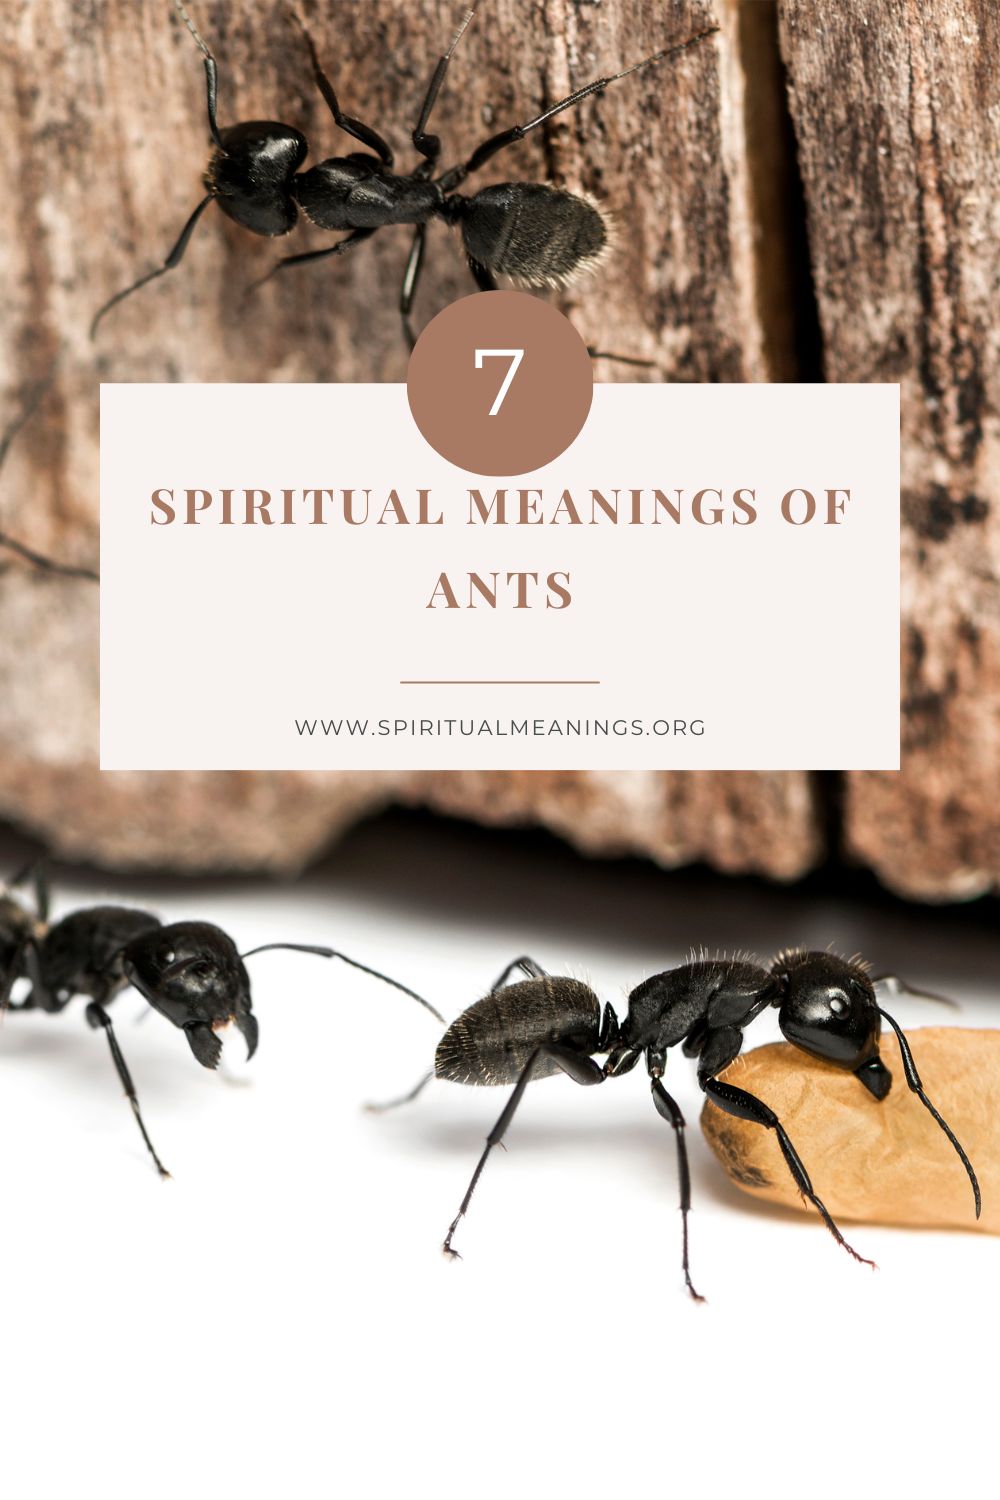 Learning from the Spiritual Message of Ants